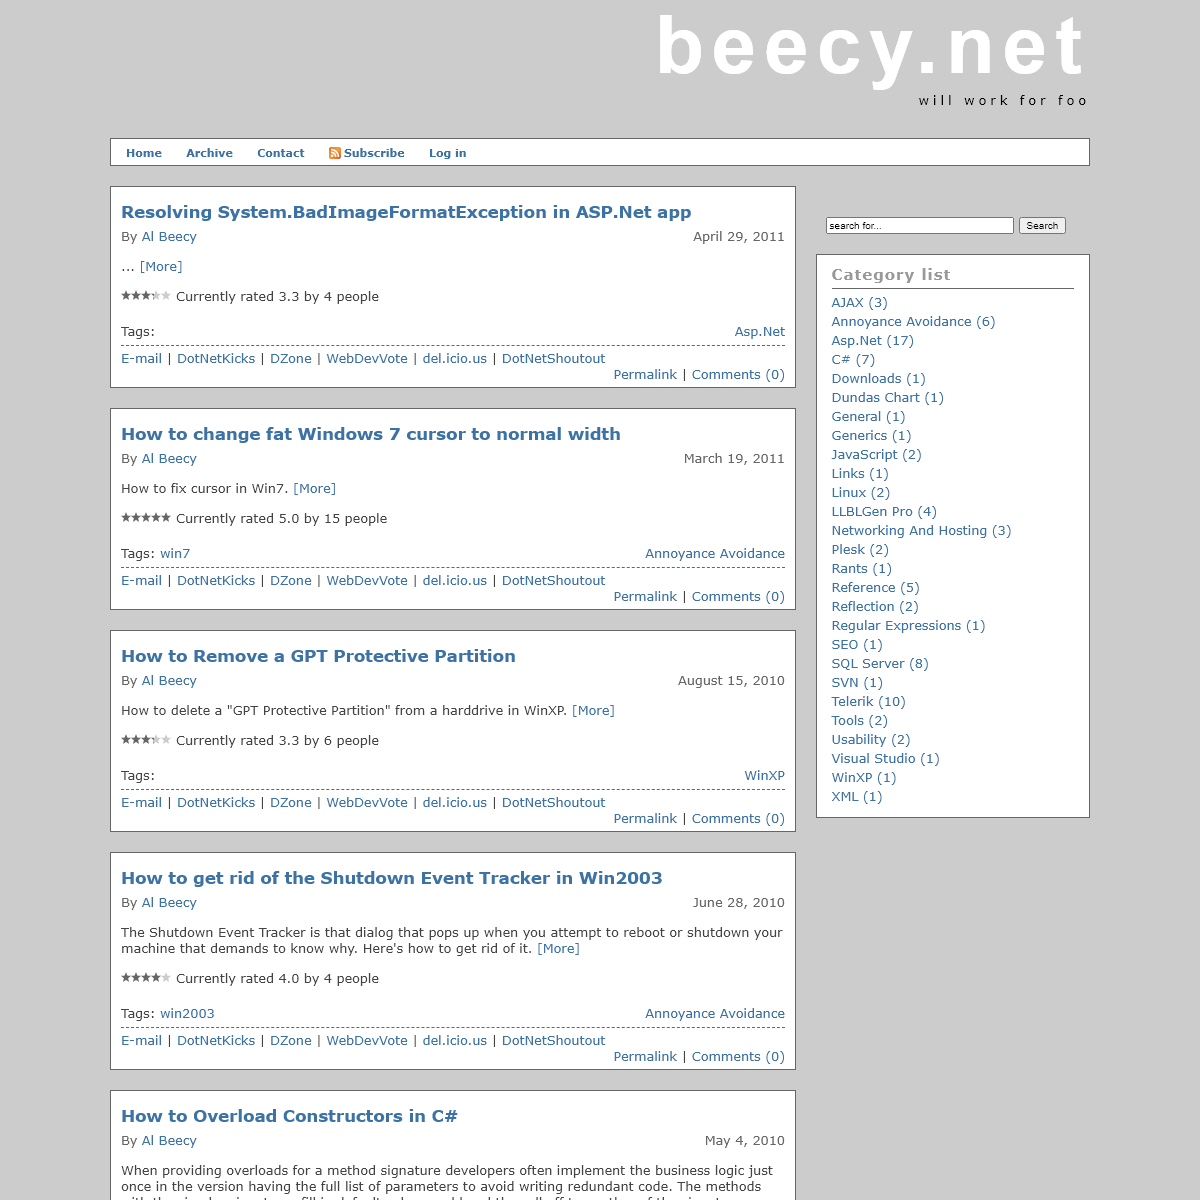 A complete backup of beecy.net